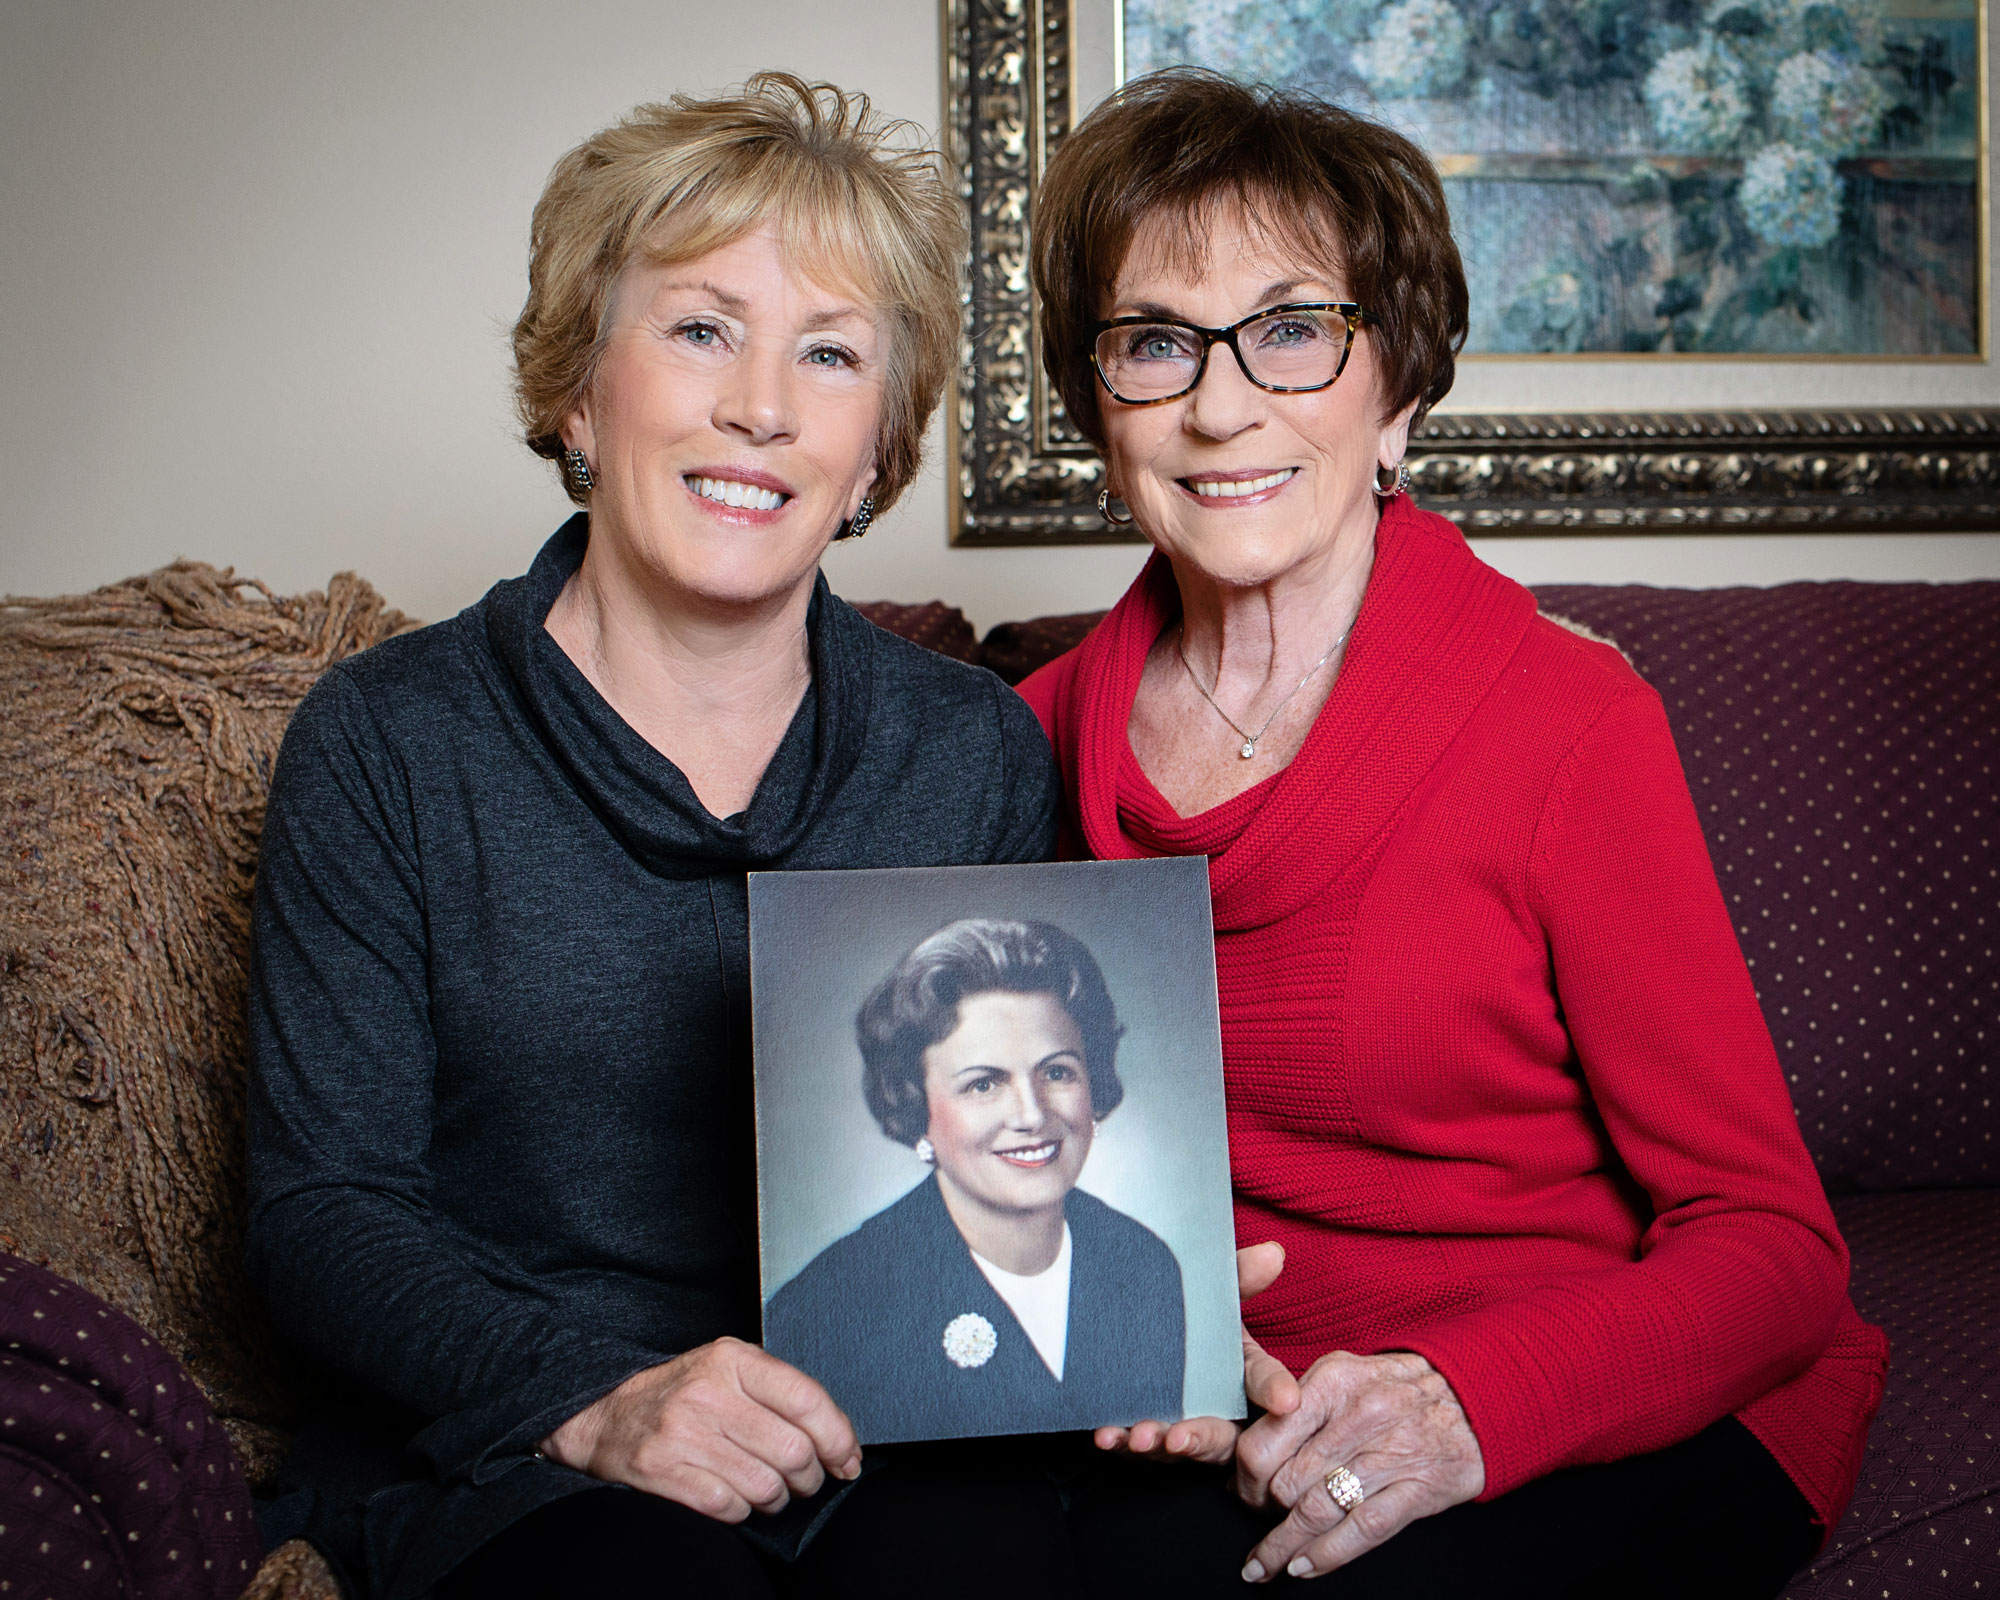 two women holding photo of another woman